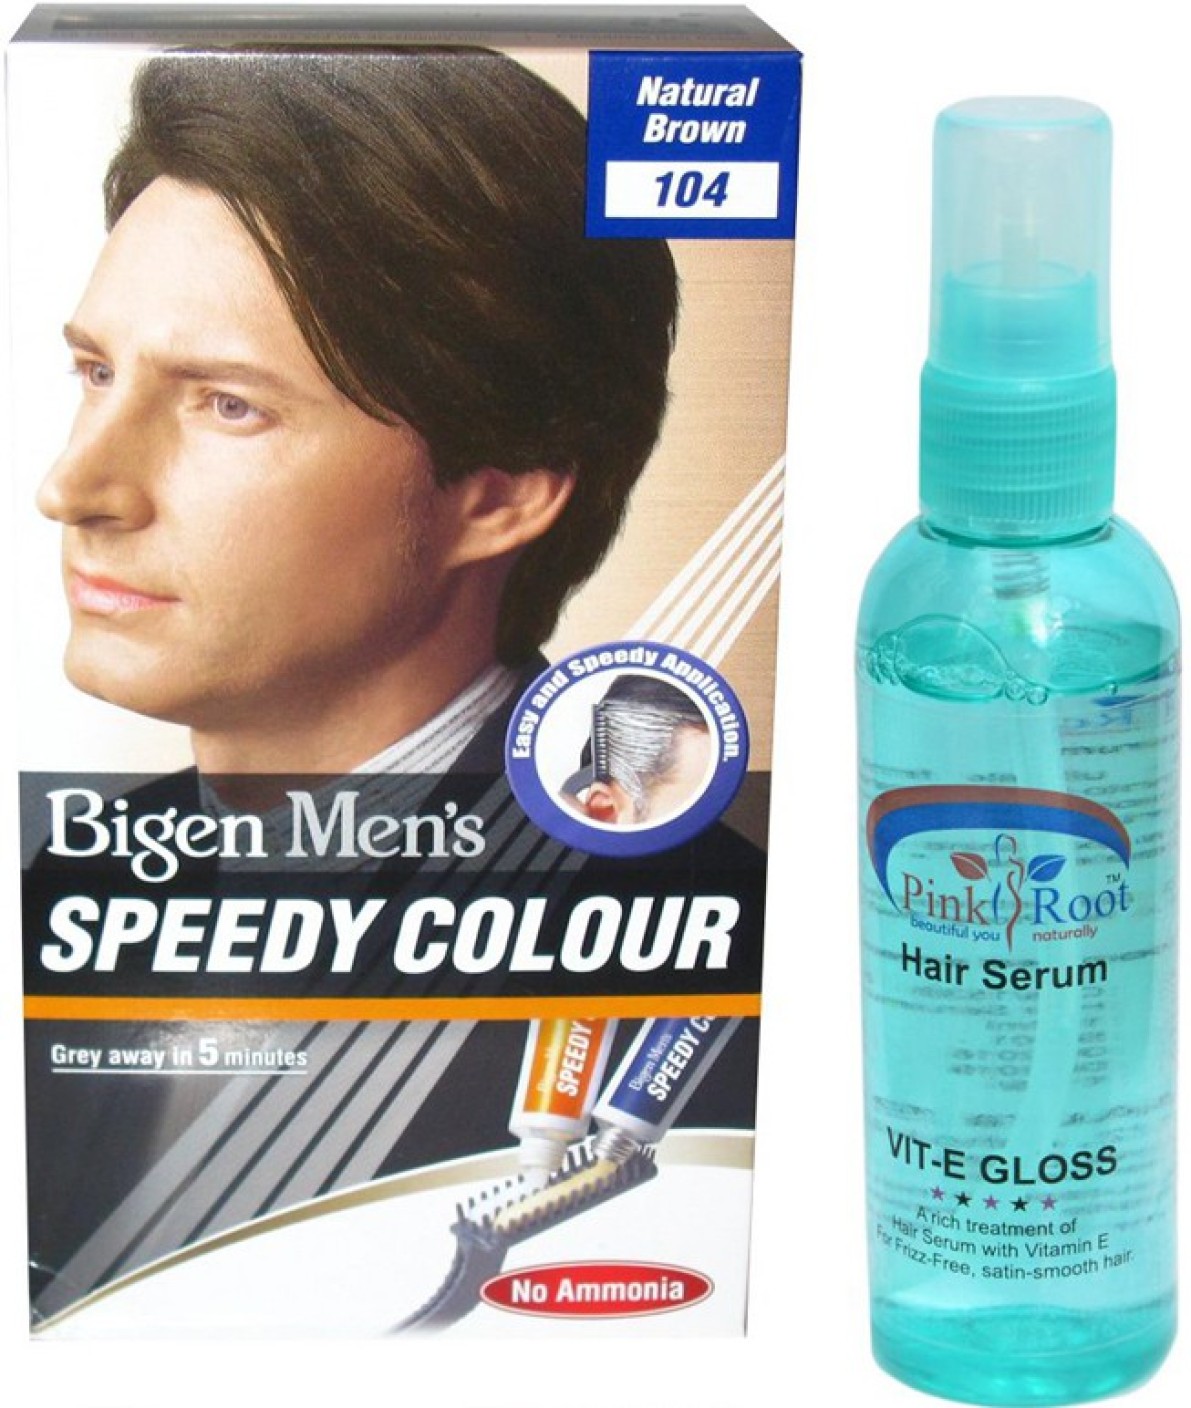 Bigen MENs SPEEDY HAIR COLOUR 104 NATURAL BROWN WITH PINK ROOT